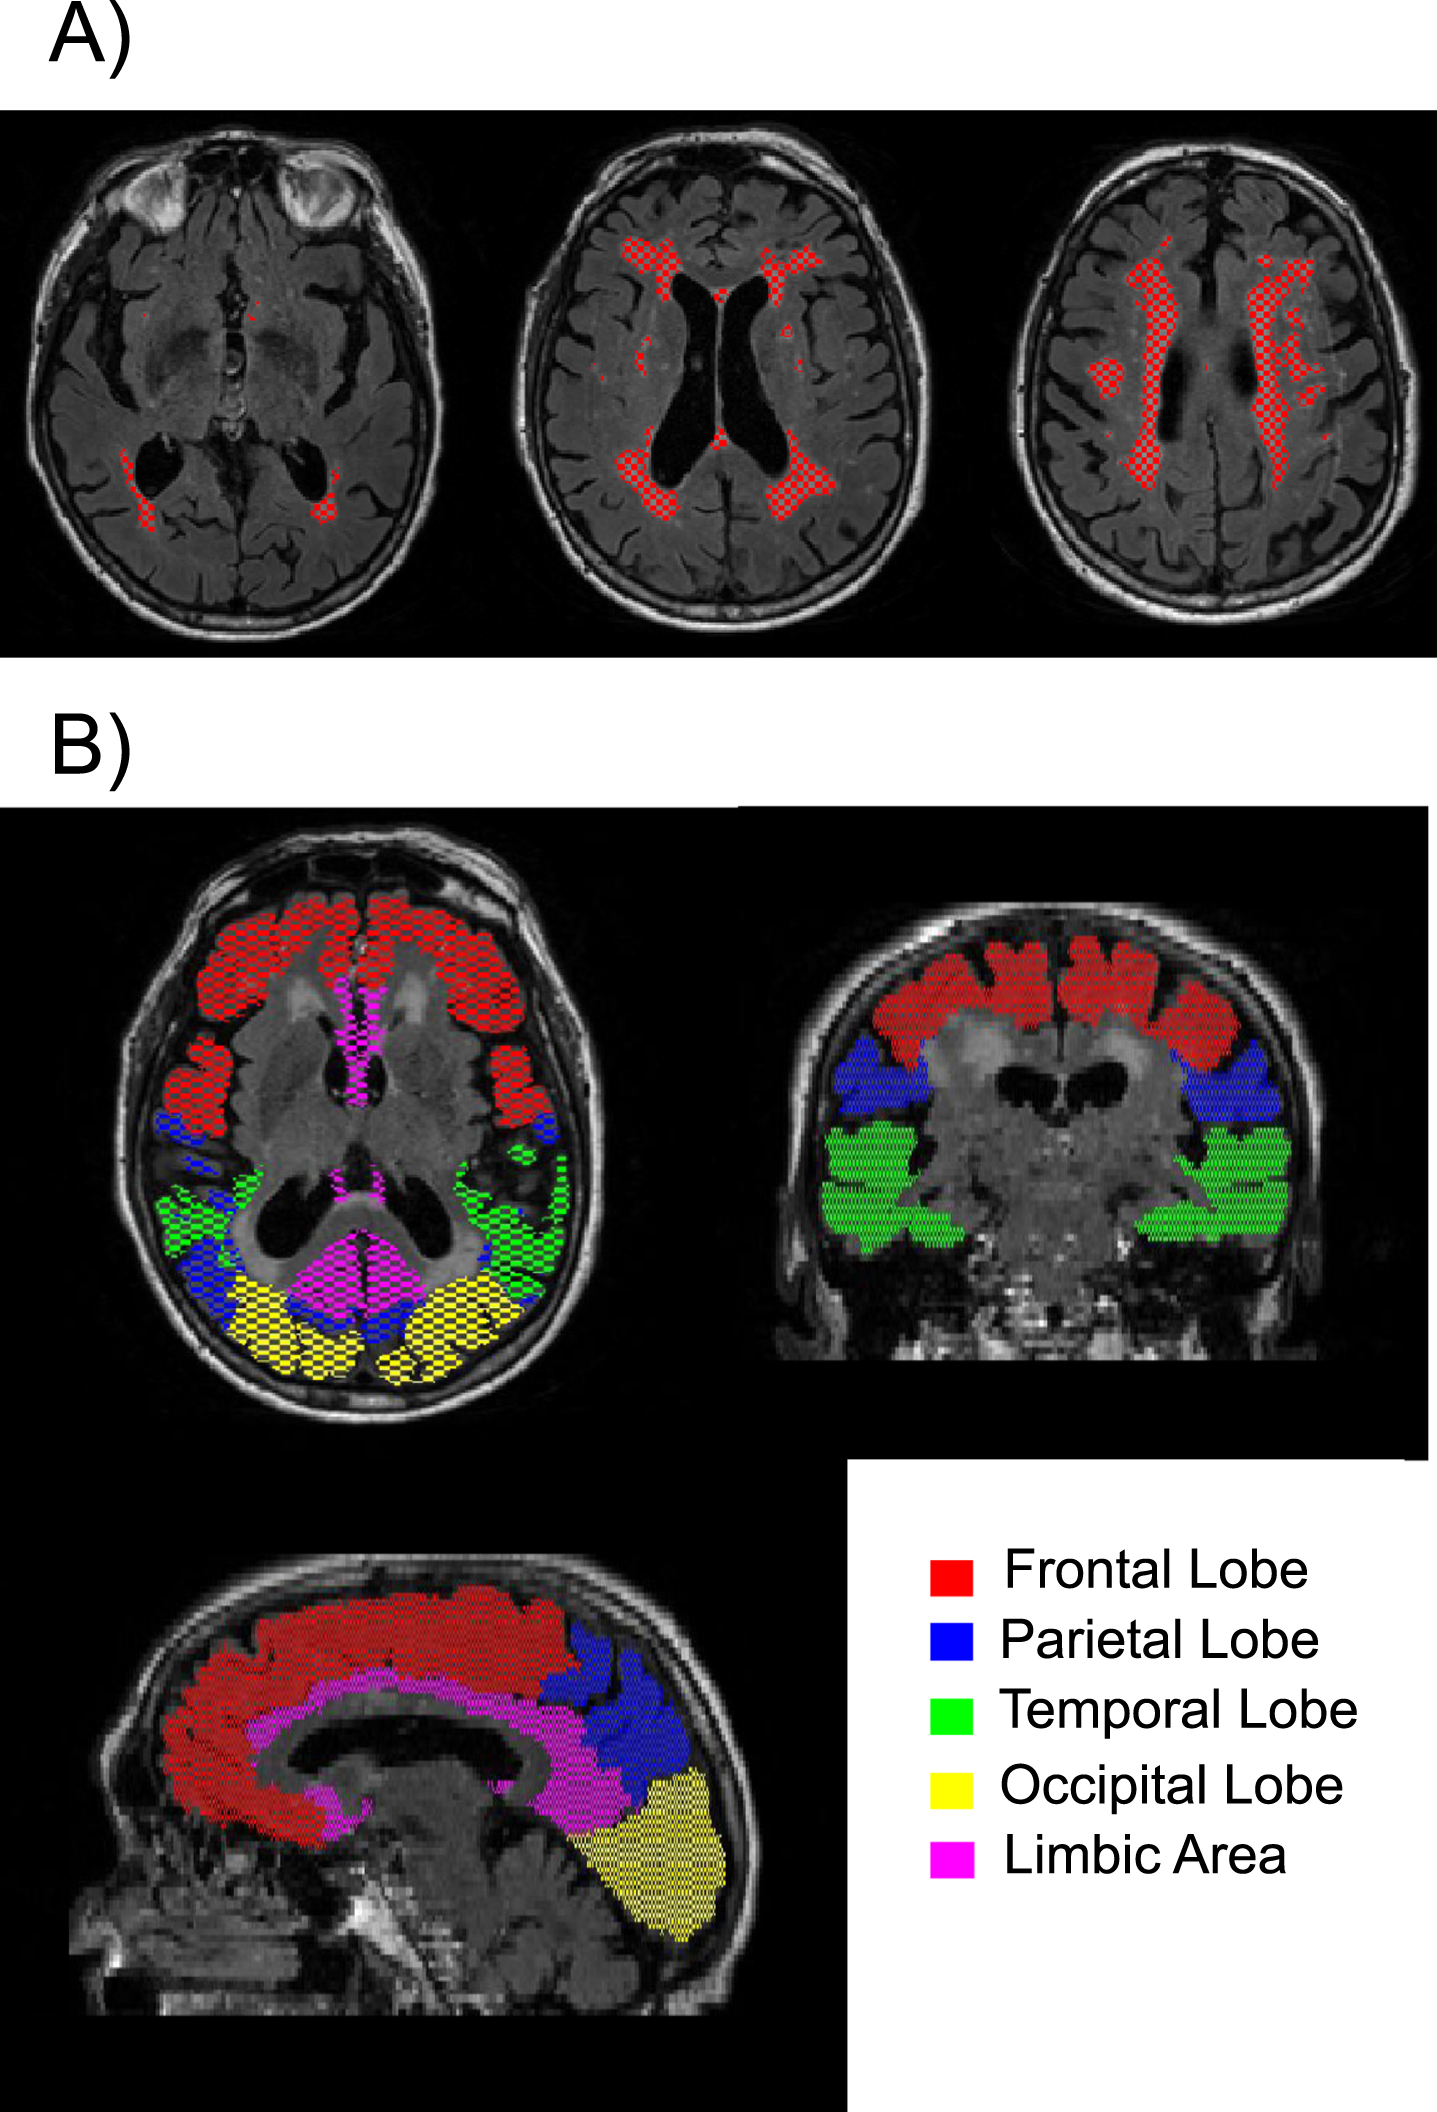 Example of A) segmented white matter hyperintensities are shown in red on three different axial slices; and B) the five regions of interest examined are shown in different colors.